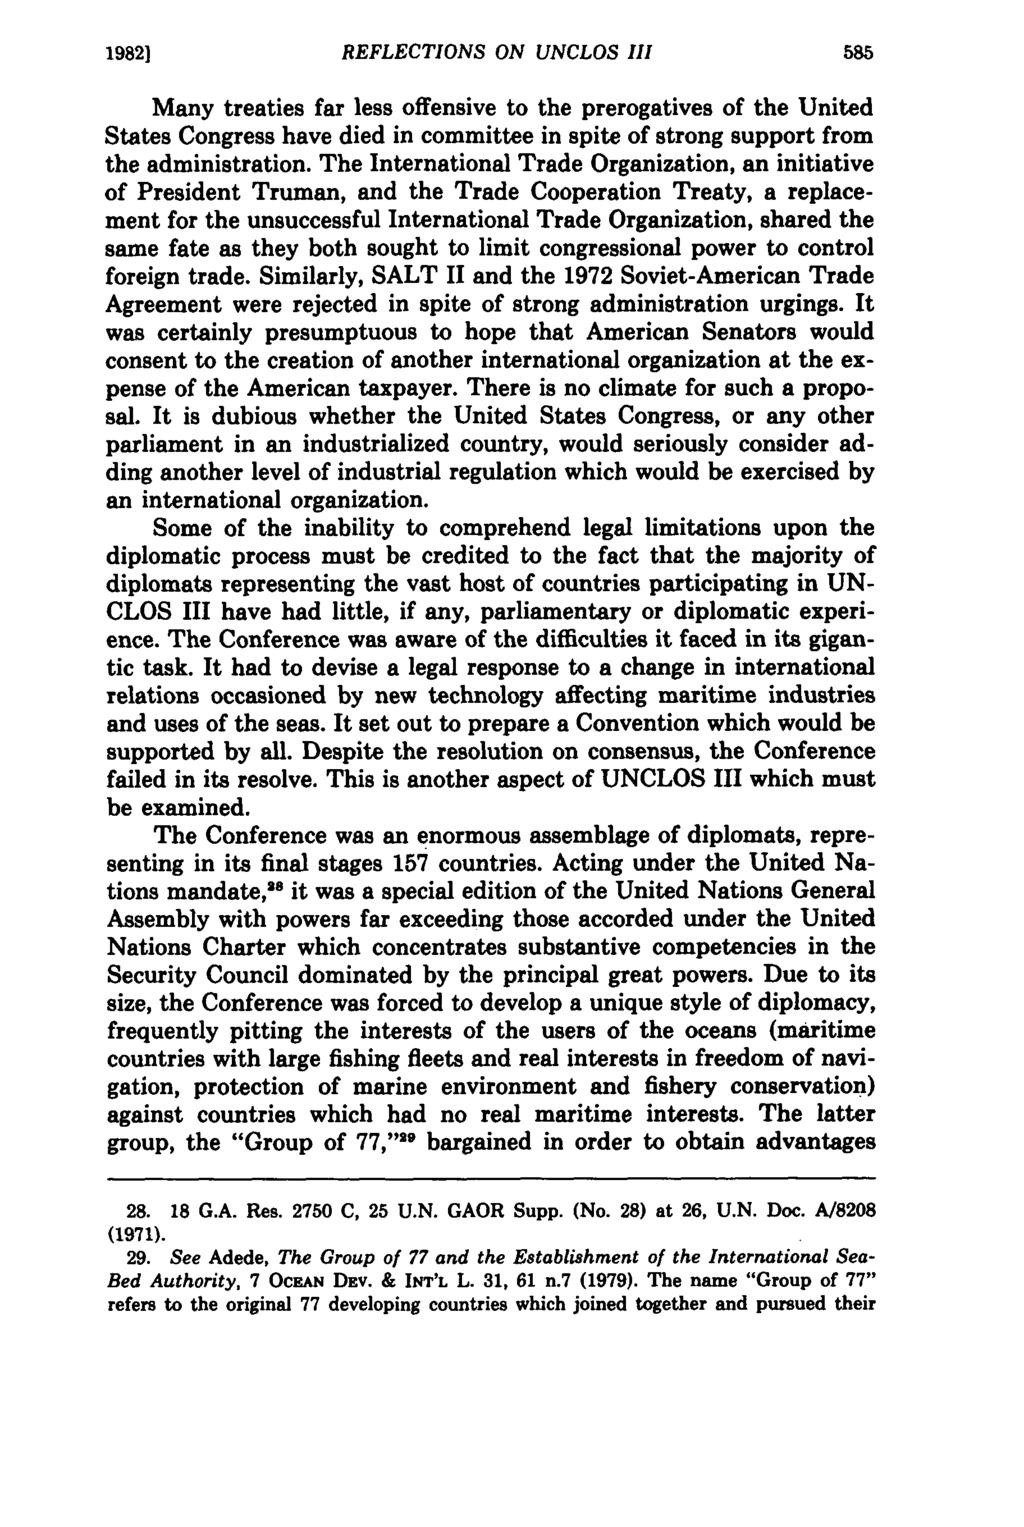 19821 REFLECTIONS ON UNCLOS III Many treaties far less offensive to the prerogatives of the United States Congress have died in committee in spite of strong support from the administration.